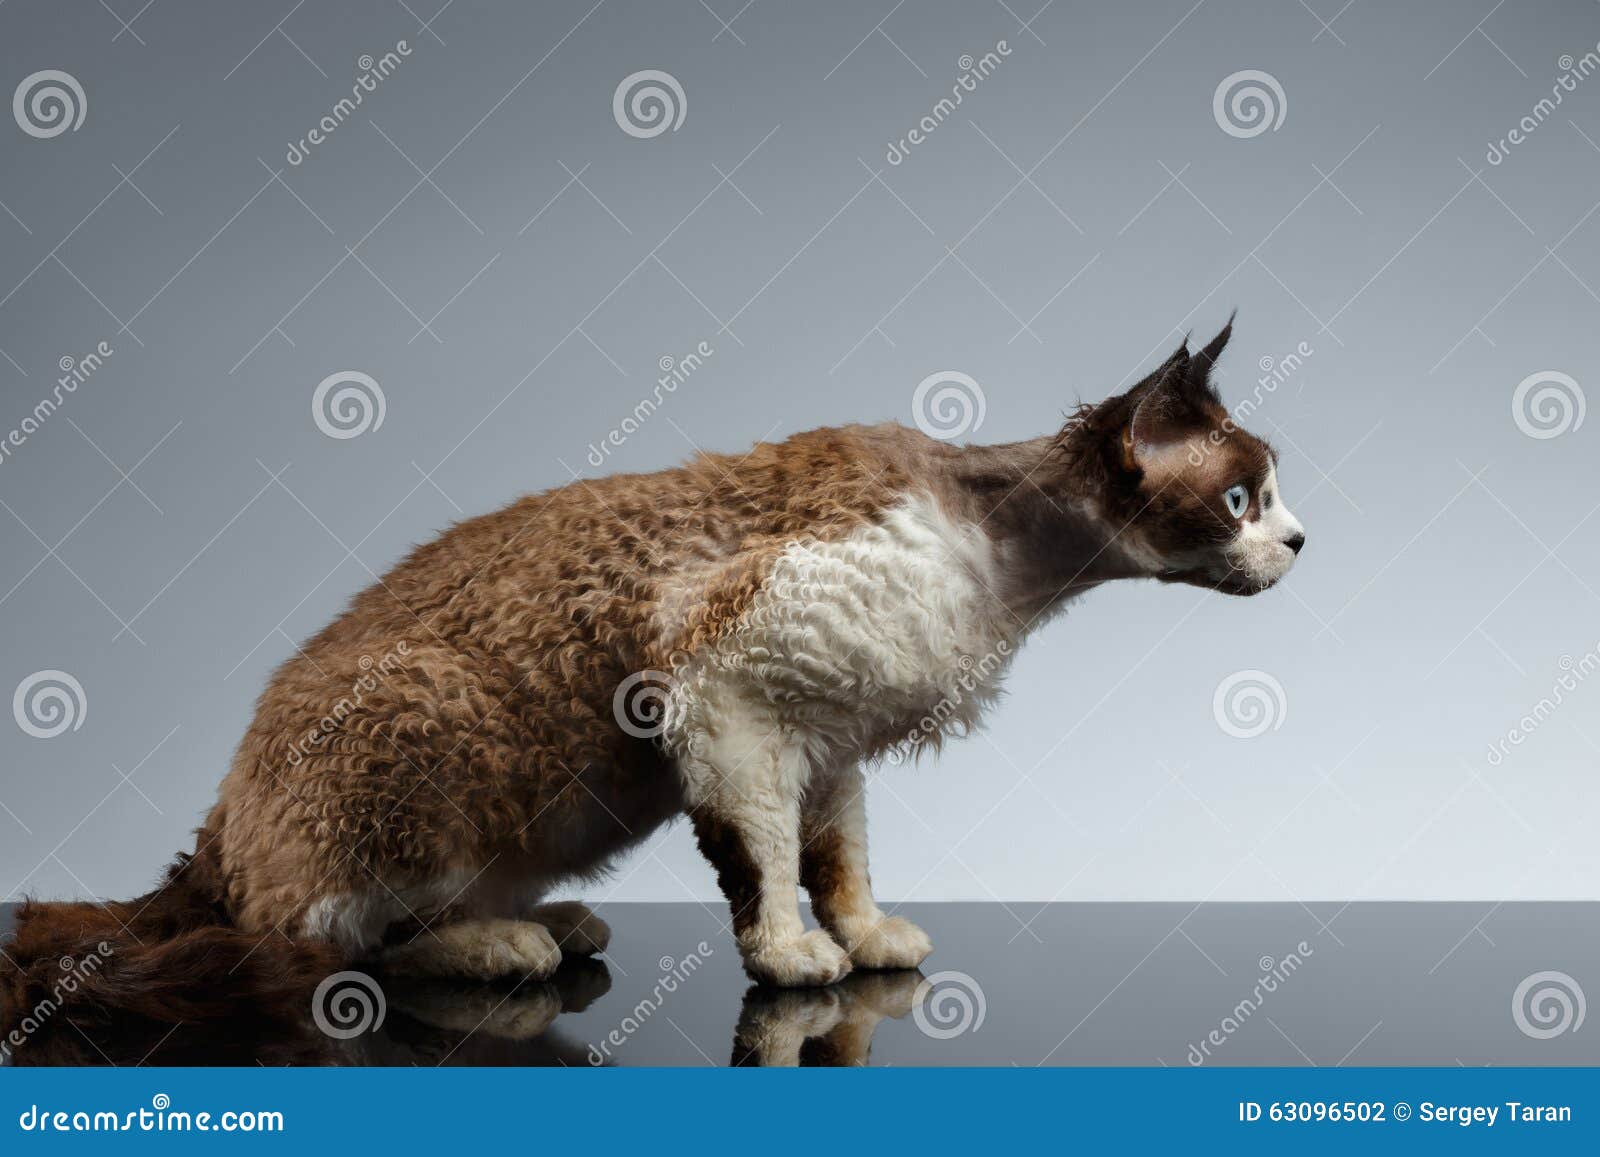 crouched devon rex in profile view on gray